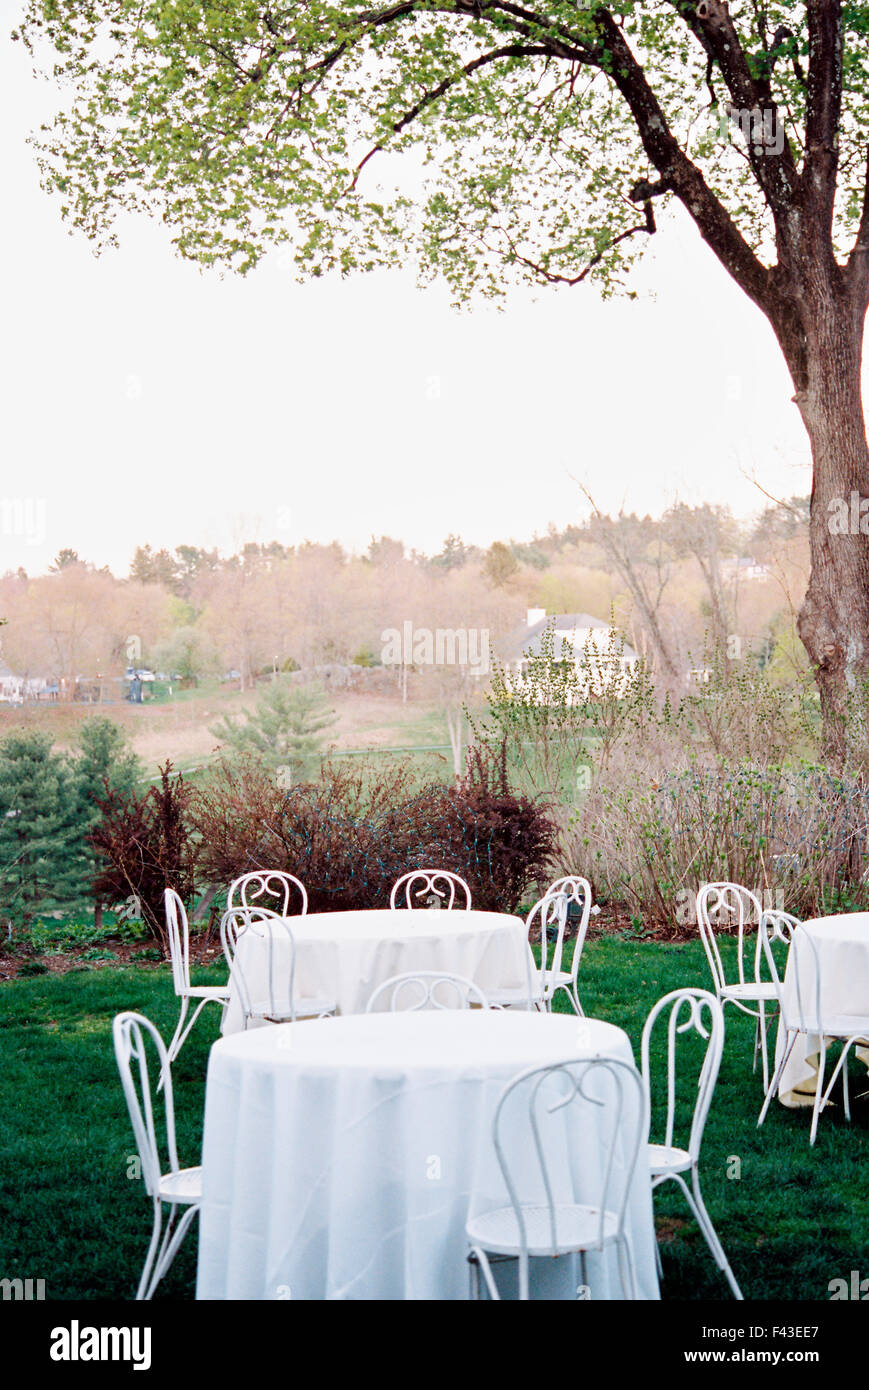 Tables and chairs set with white table clothes in a hotel garden overlooking a wooded valley. Stock Photo